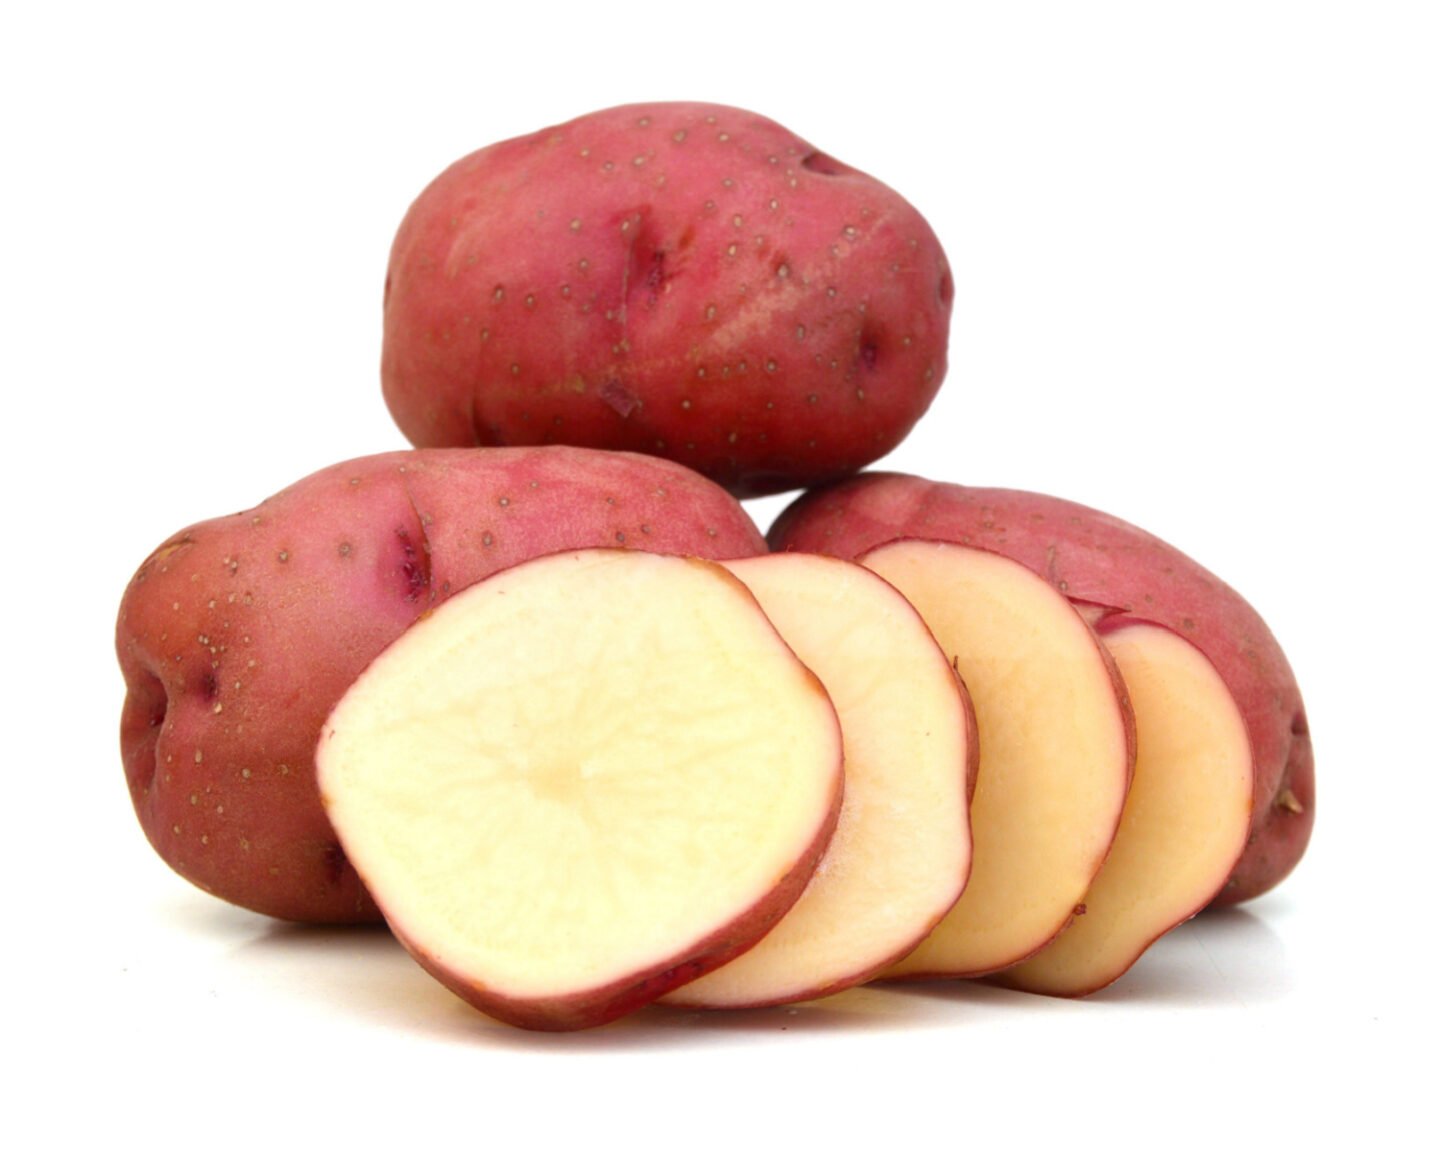 red potatoes or asterix potatoes